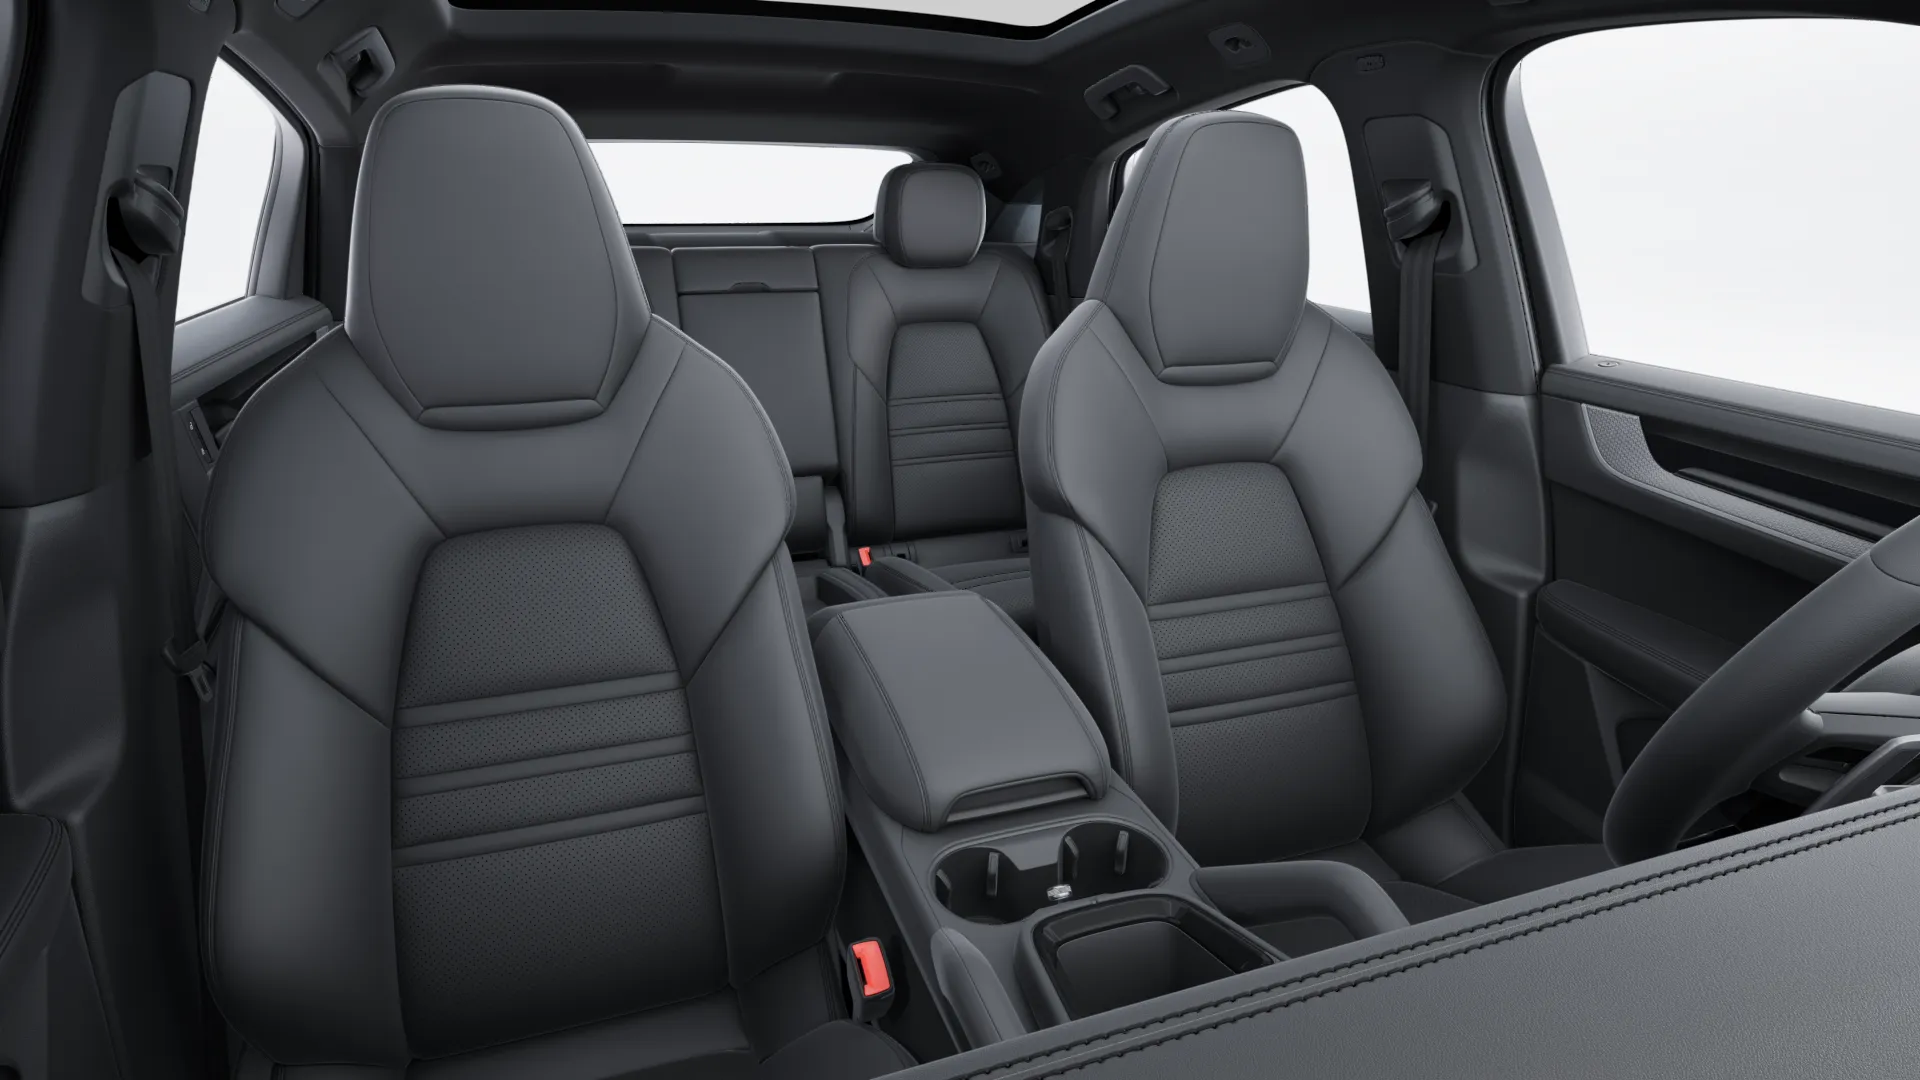 Interior view of Cayenne S Coupé